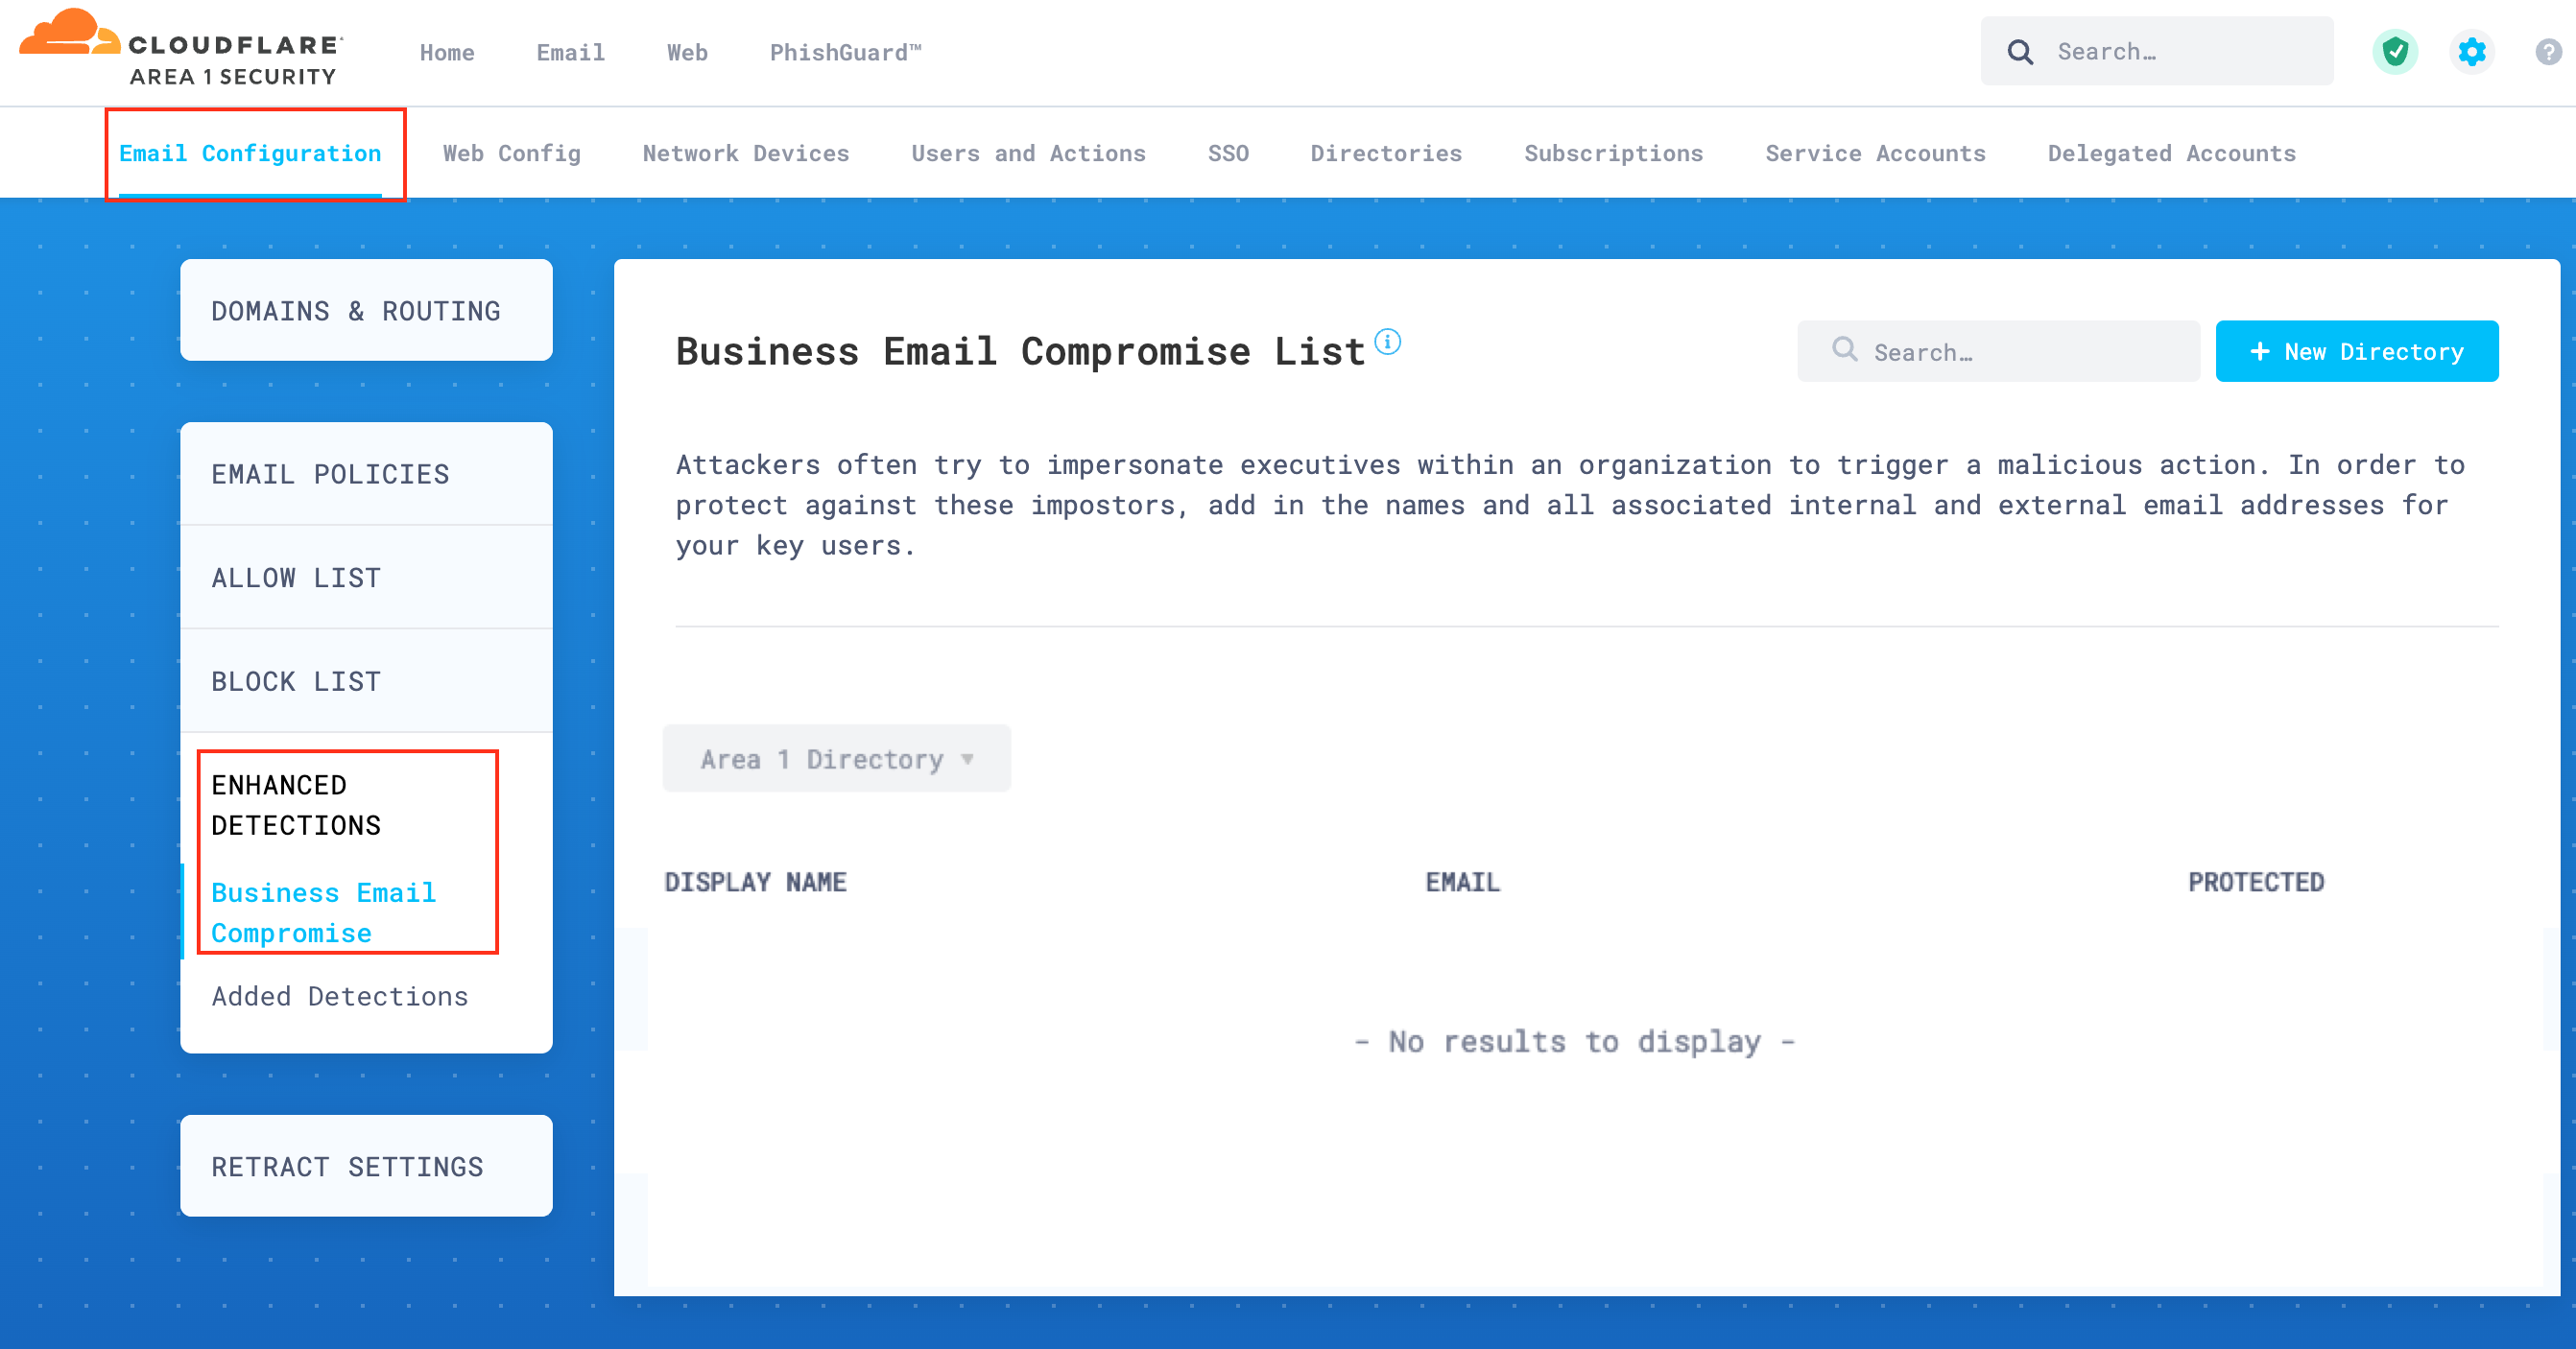 Access Business Email Compromise in Cloud Email Security dashboard to start setting up this feature